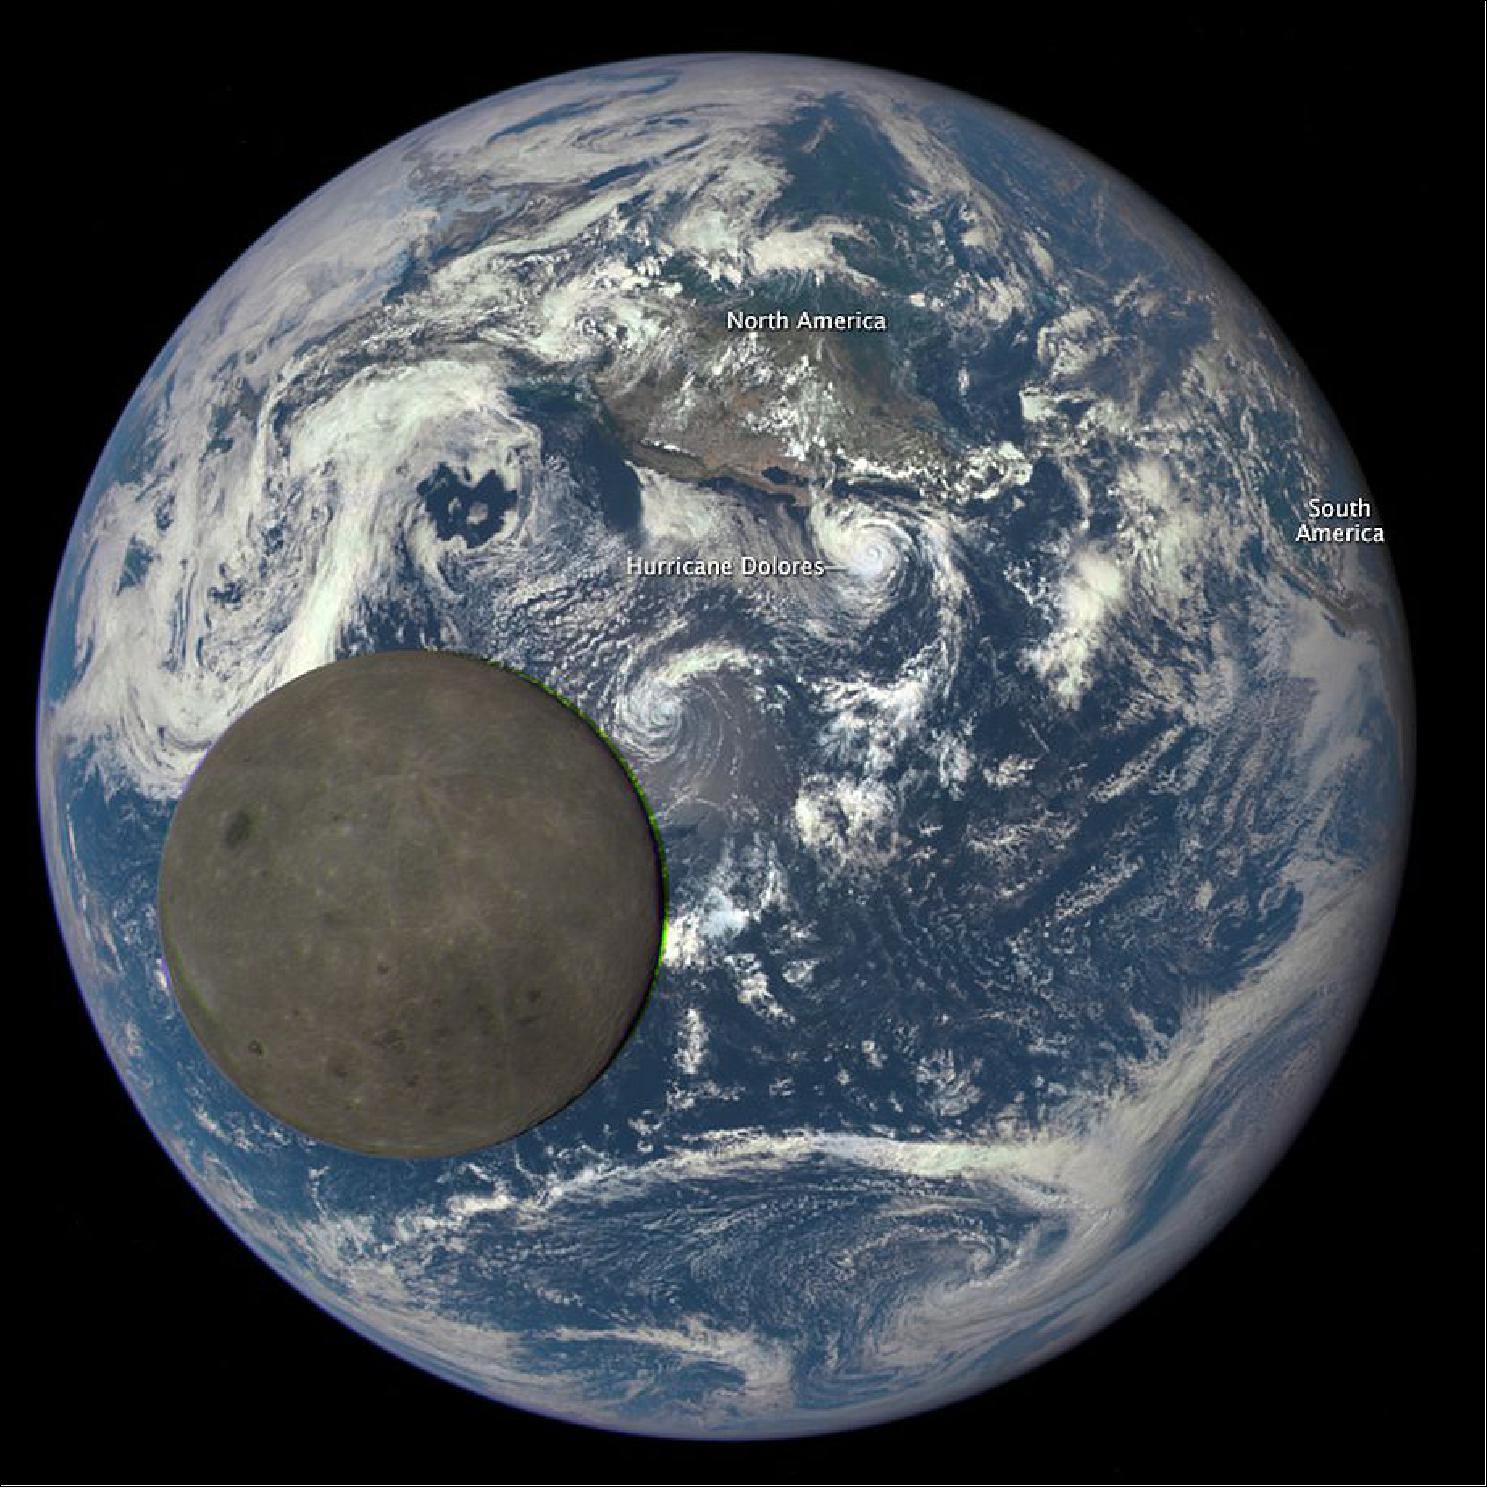 Figure 35: On July 16, 2015, NASA's EPIC (Earth Polychromatic Imaging Camera) instrument on DSCOVR captured a unique view of the Moon as it passed between the spacecraft and Earth. The image shows the fully illuminated “dark side” of the Moon that is not visible from Earth. The DSCOVR spacecraft is located at the Lagrangian Point L1, located about 1.5 million km from Earth in the direction of the sun (image credit: NASA)